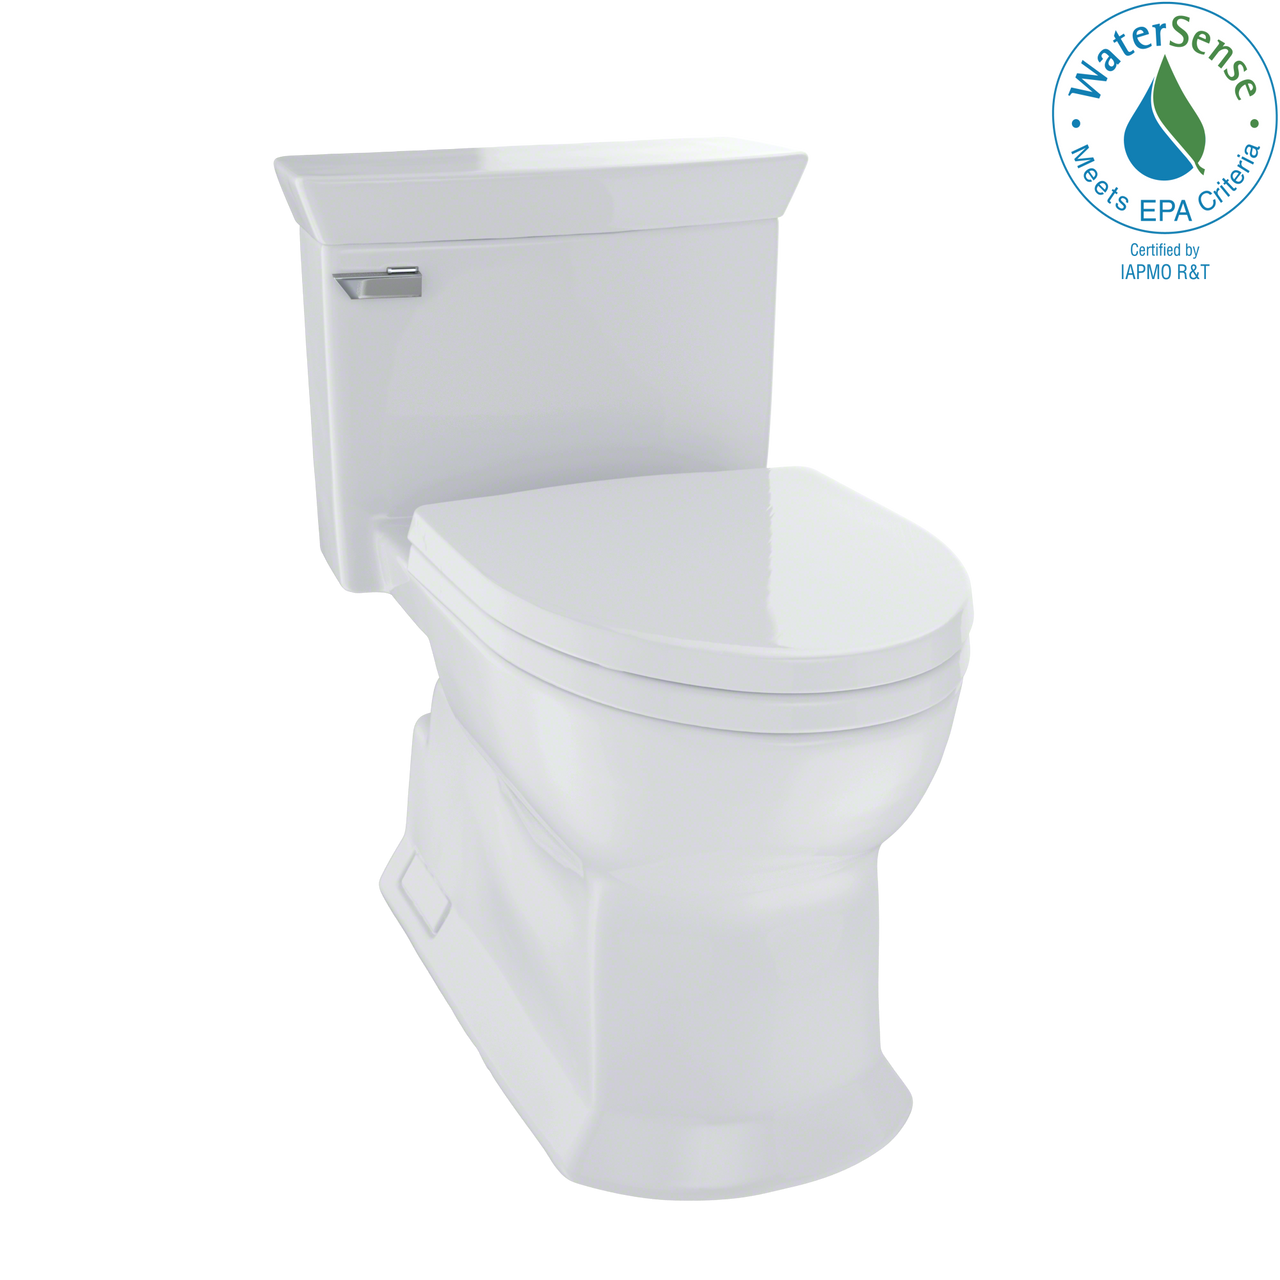 TOTO Eco Soir√©e One Piece Elongated 1.28 GPF Universal Height Skirted Toilet with CeFiONtect,   - MS964214CEFG#11 - BNGBath